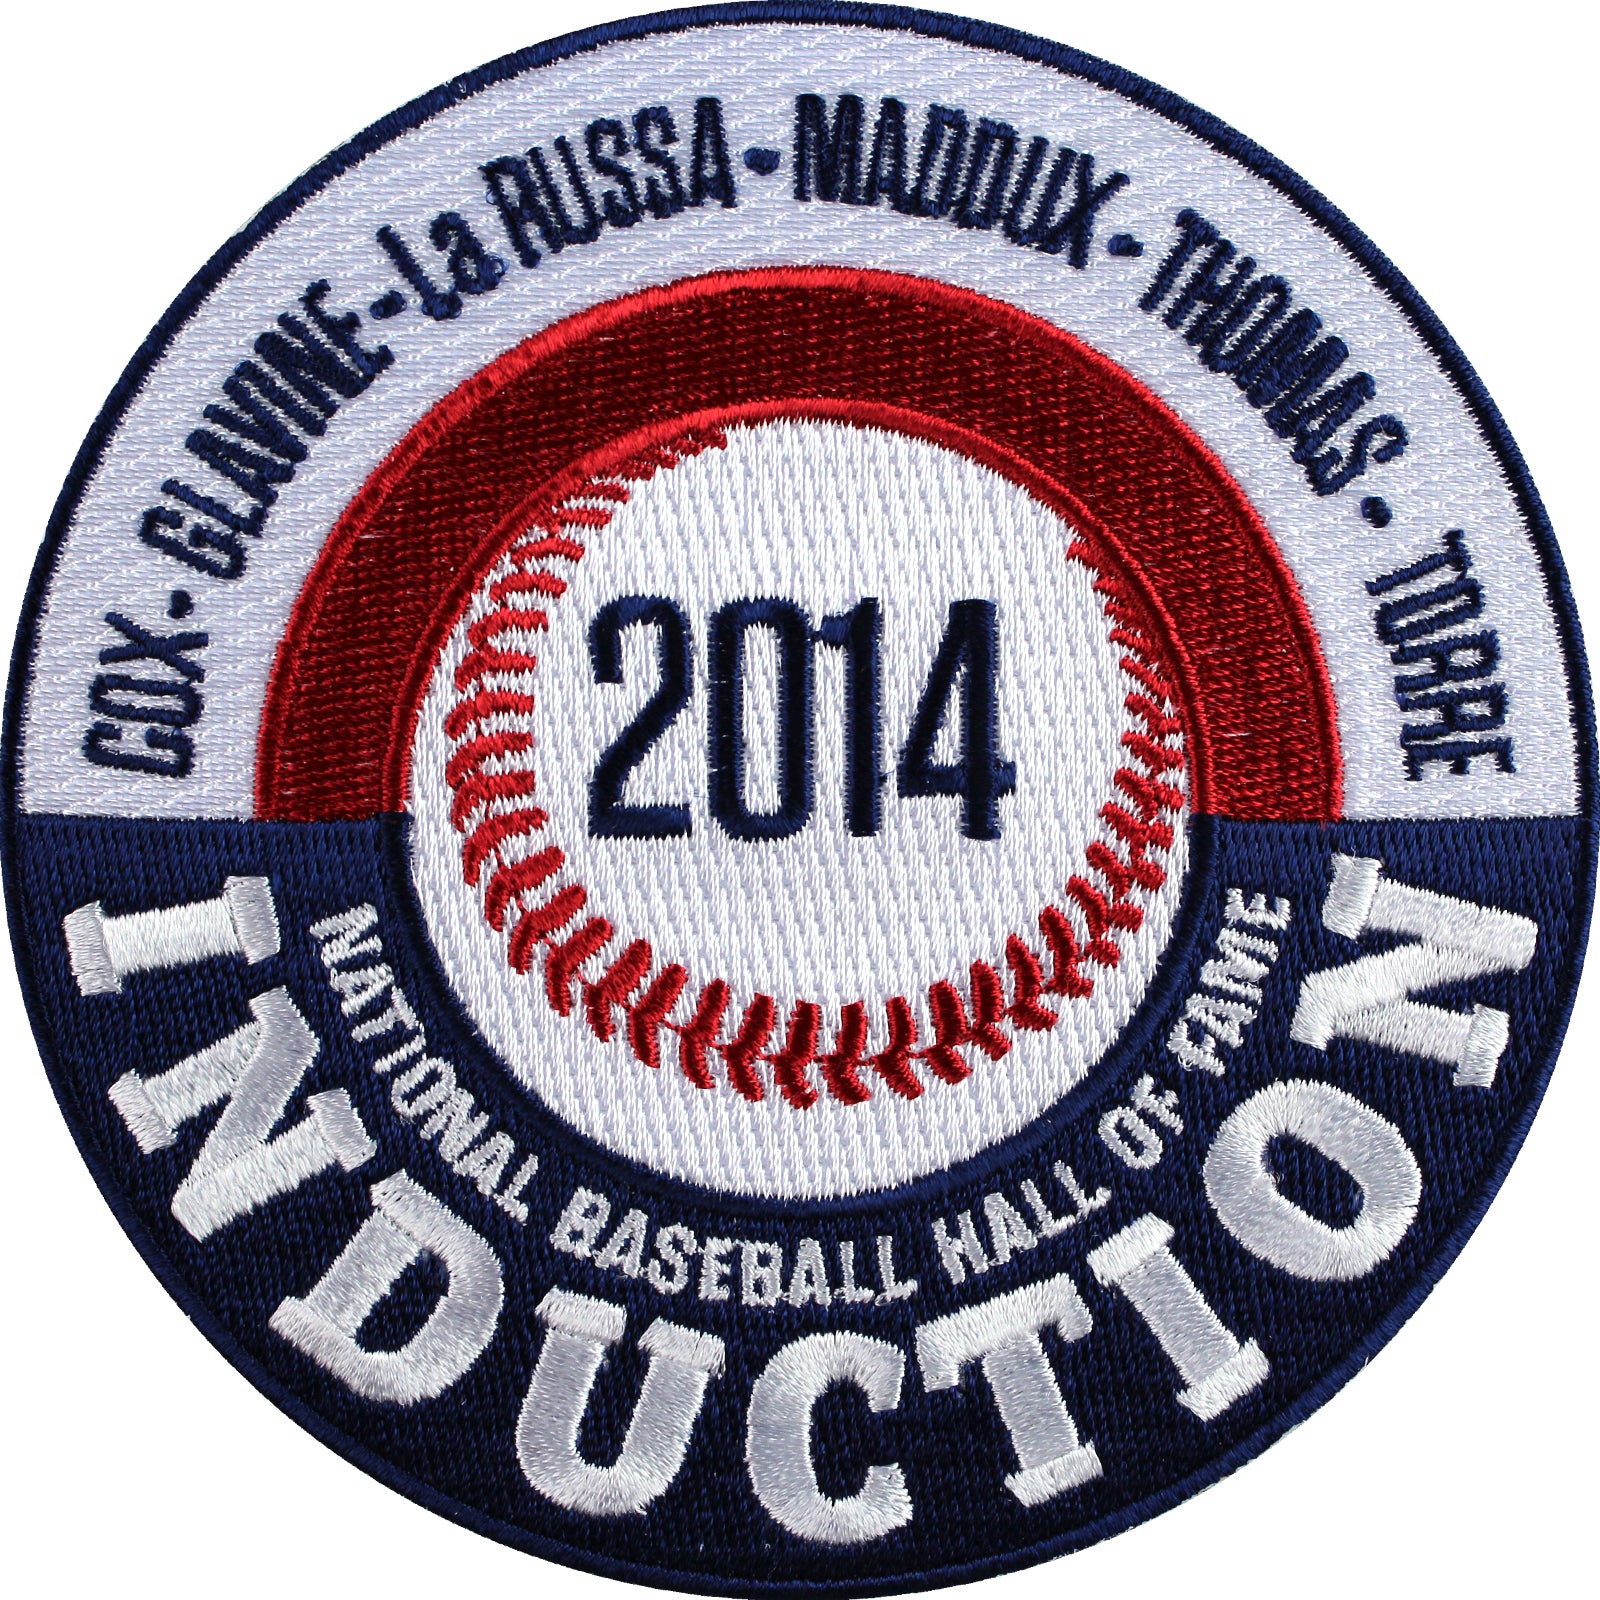 2014 National Baseball Hall Of Fame Induction Patch (Cox Glavine Maddux LaRussa Thomas Torre) 